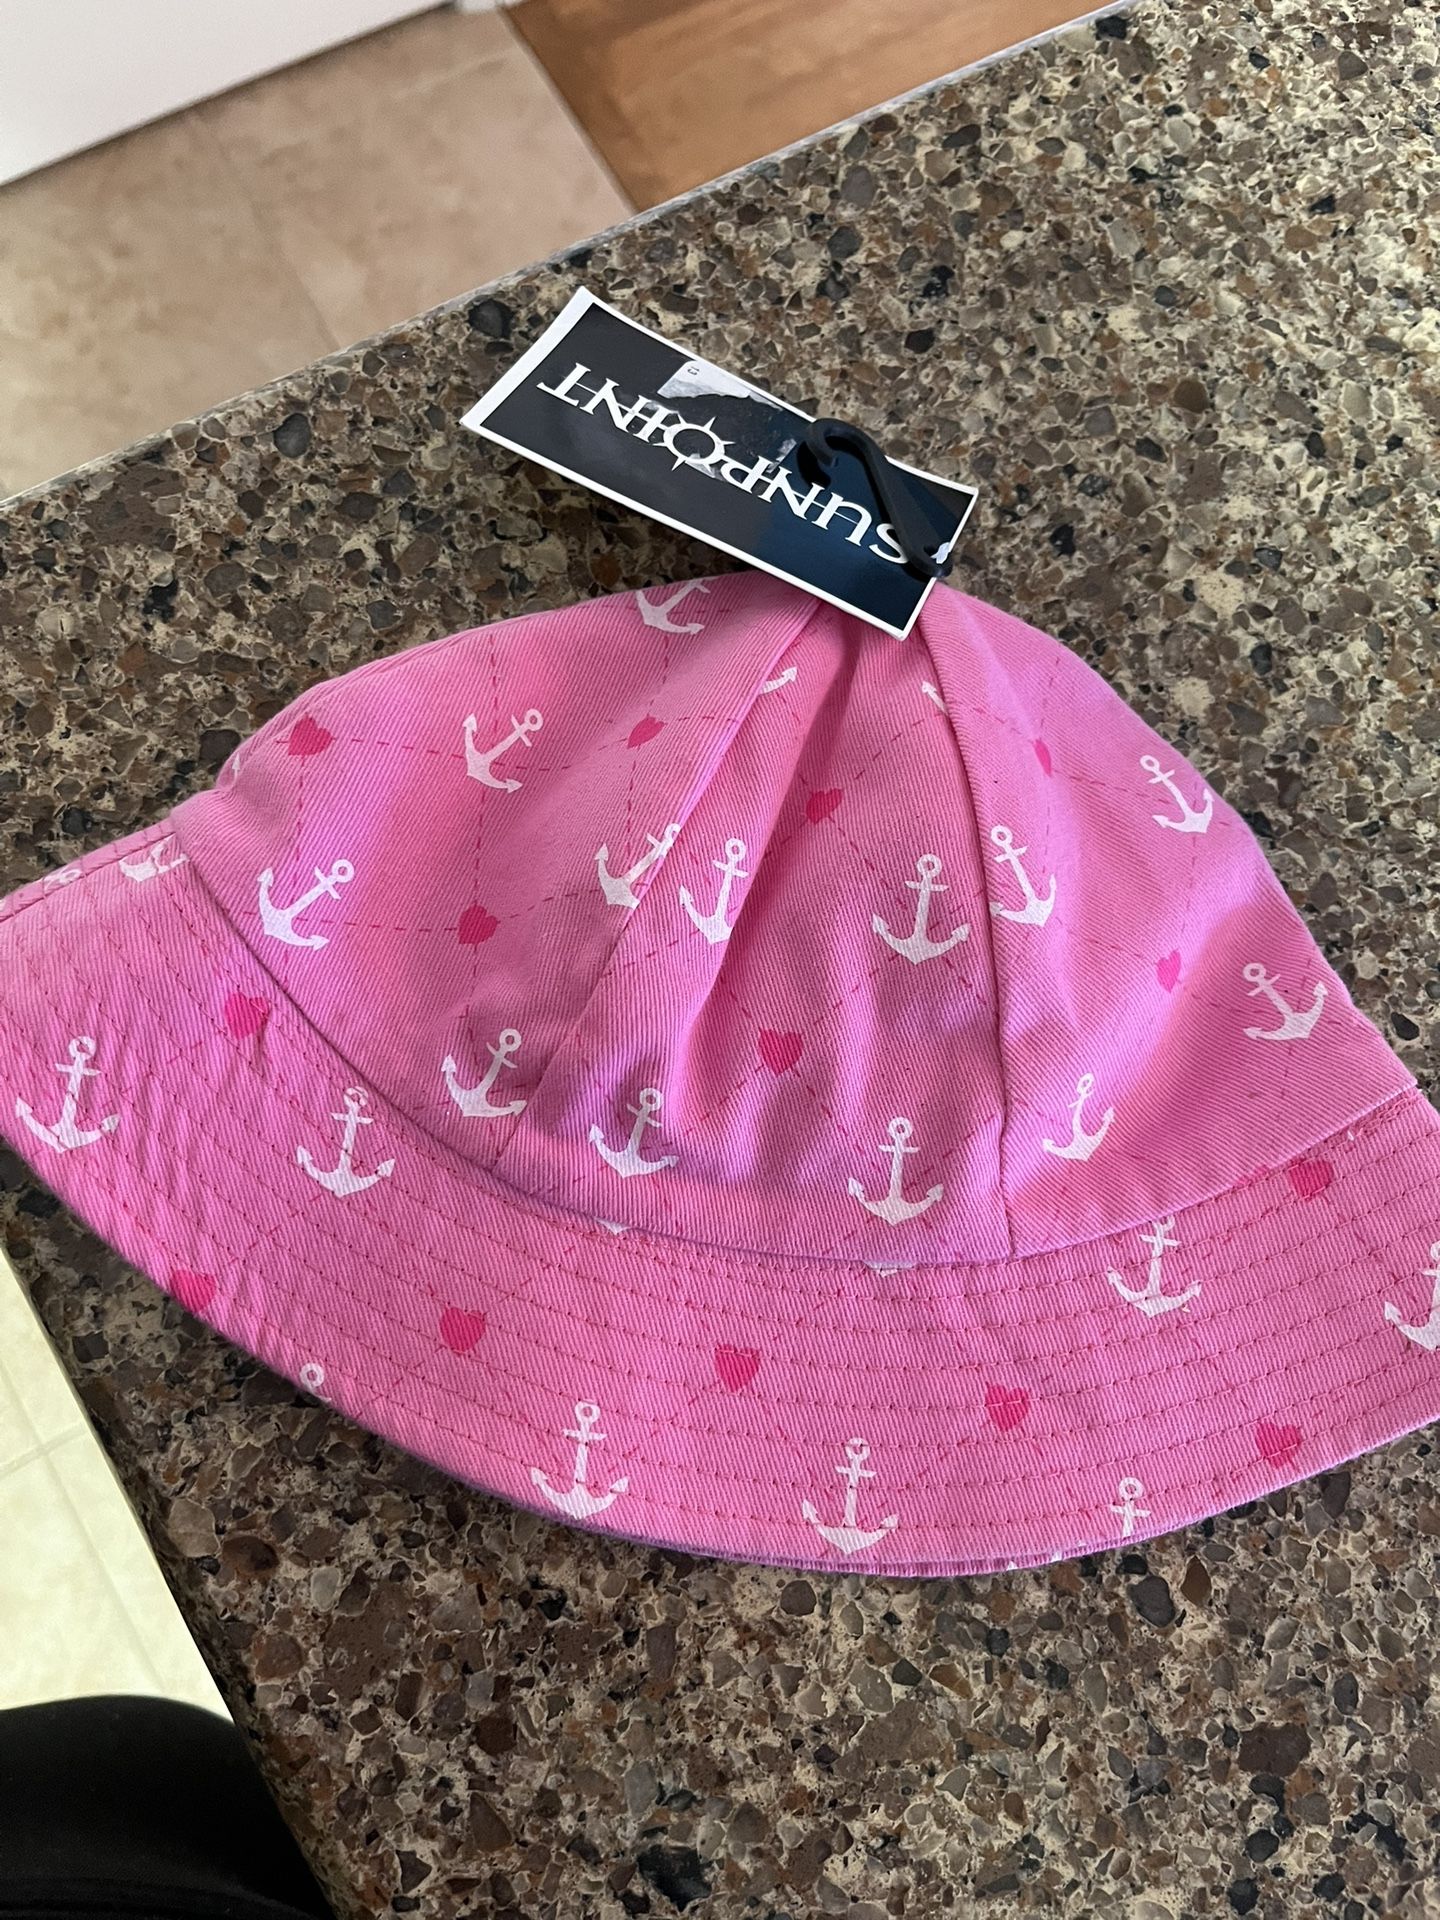 new pink anchor sun hat sunpoint brand toddler size 